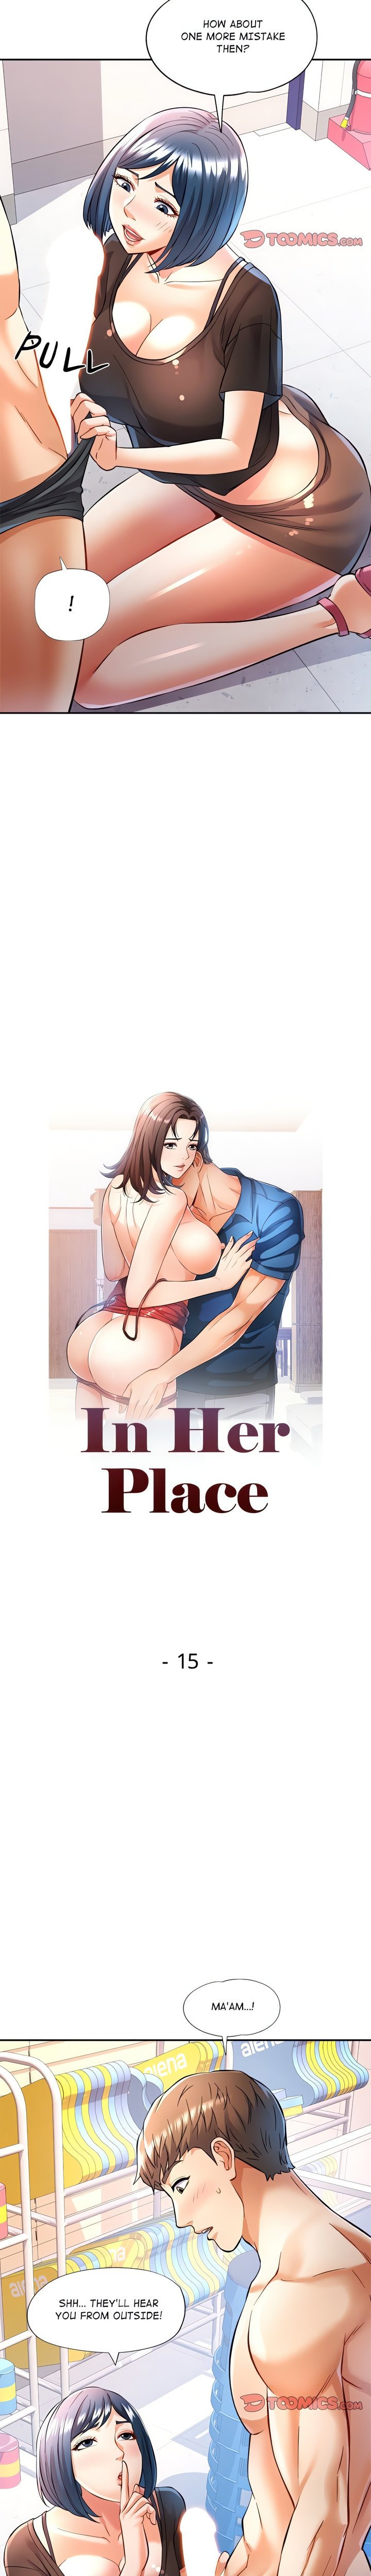 in-her-place-chap-15-1